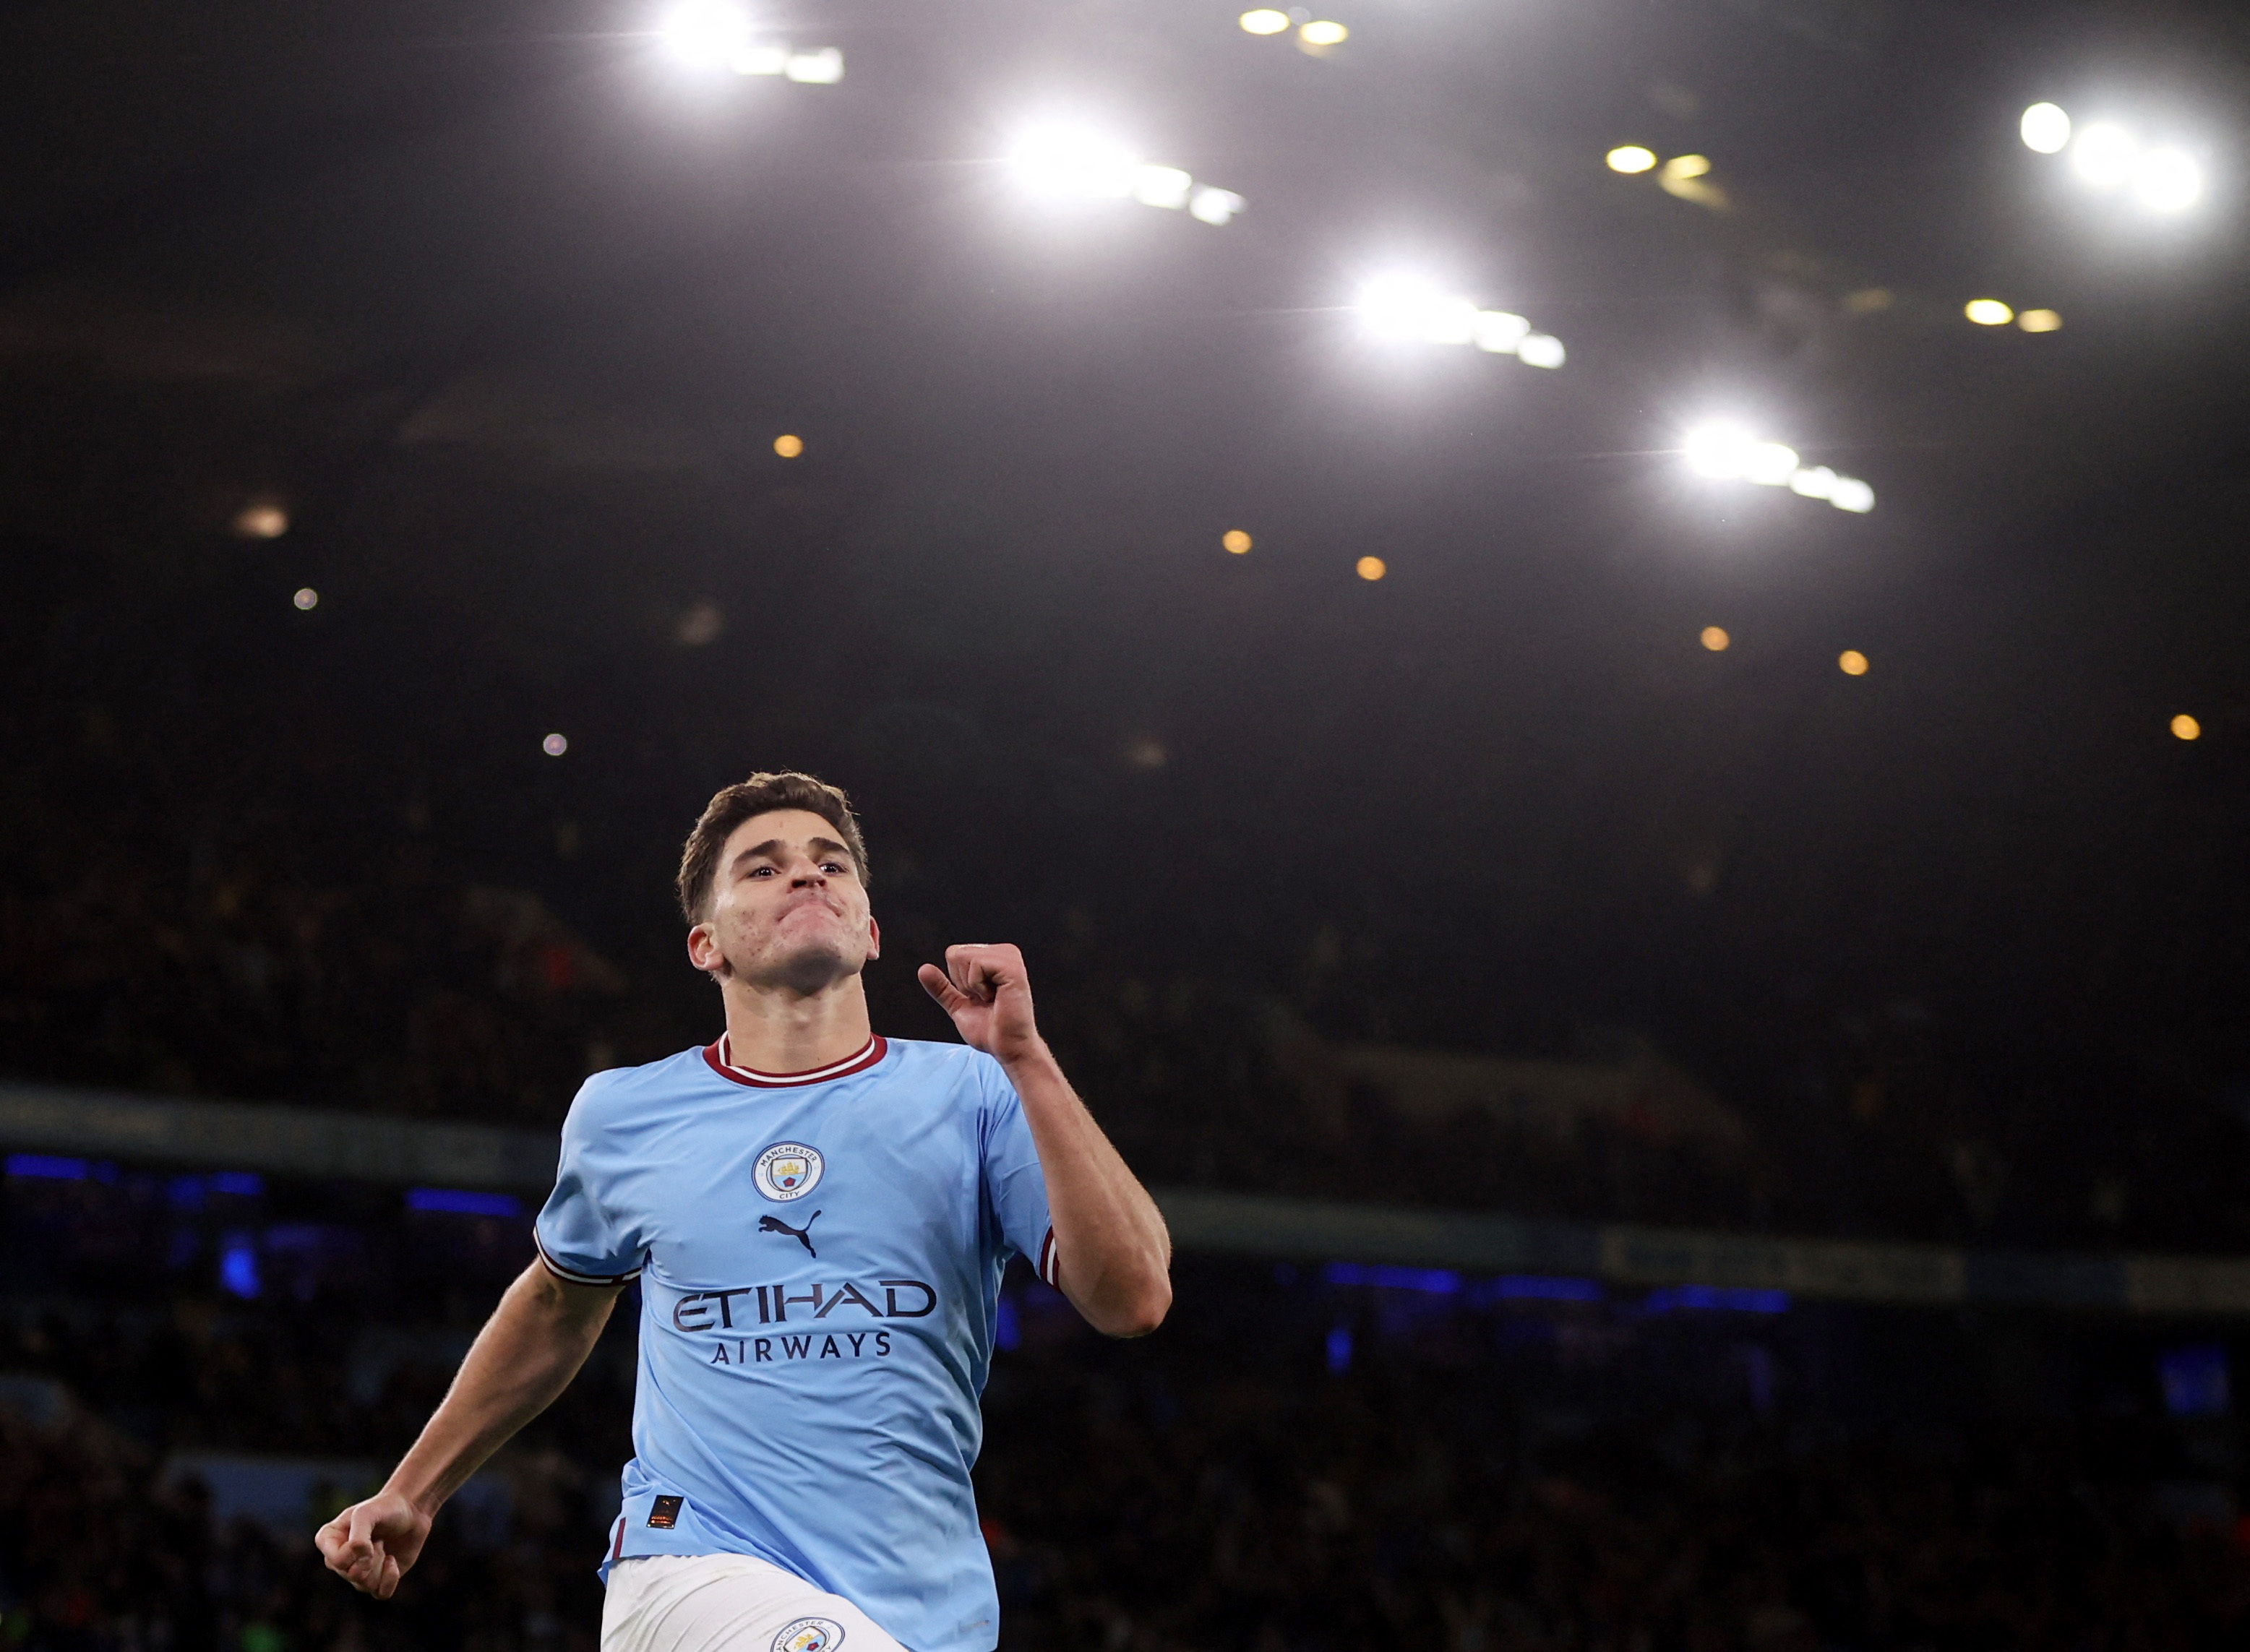 Julián Álvarez will have a significant contract improvement at Manchester City (Reuters/Lee Smith)